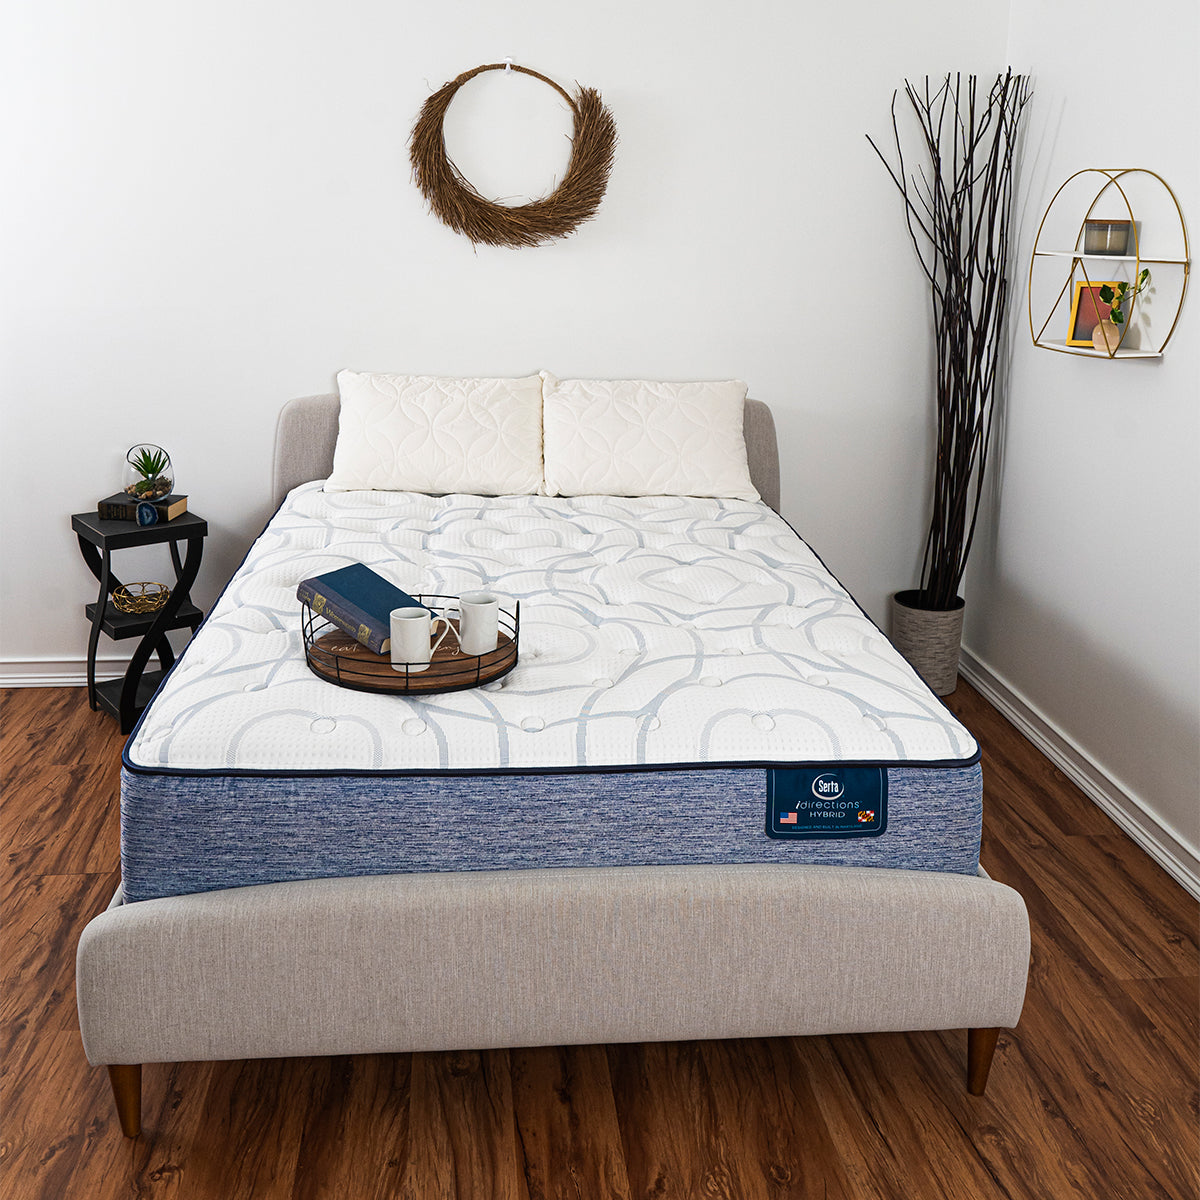 Serta iDirections X6 Hybrid II Firm Mattress On Bed Frame In Bedroom Overhead View